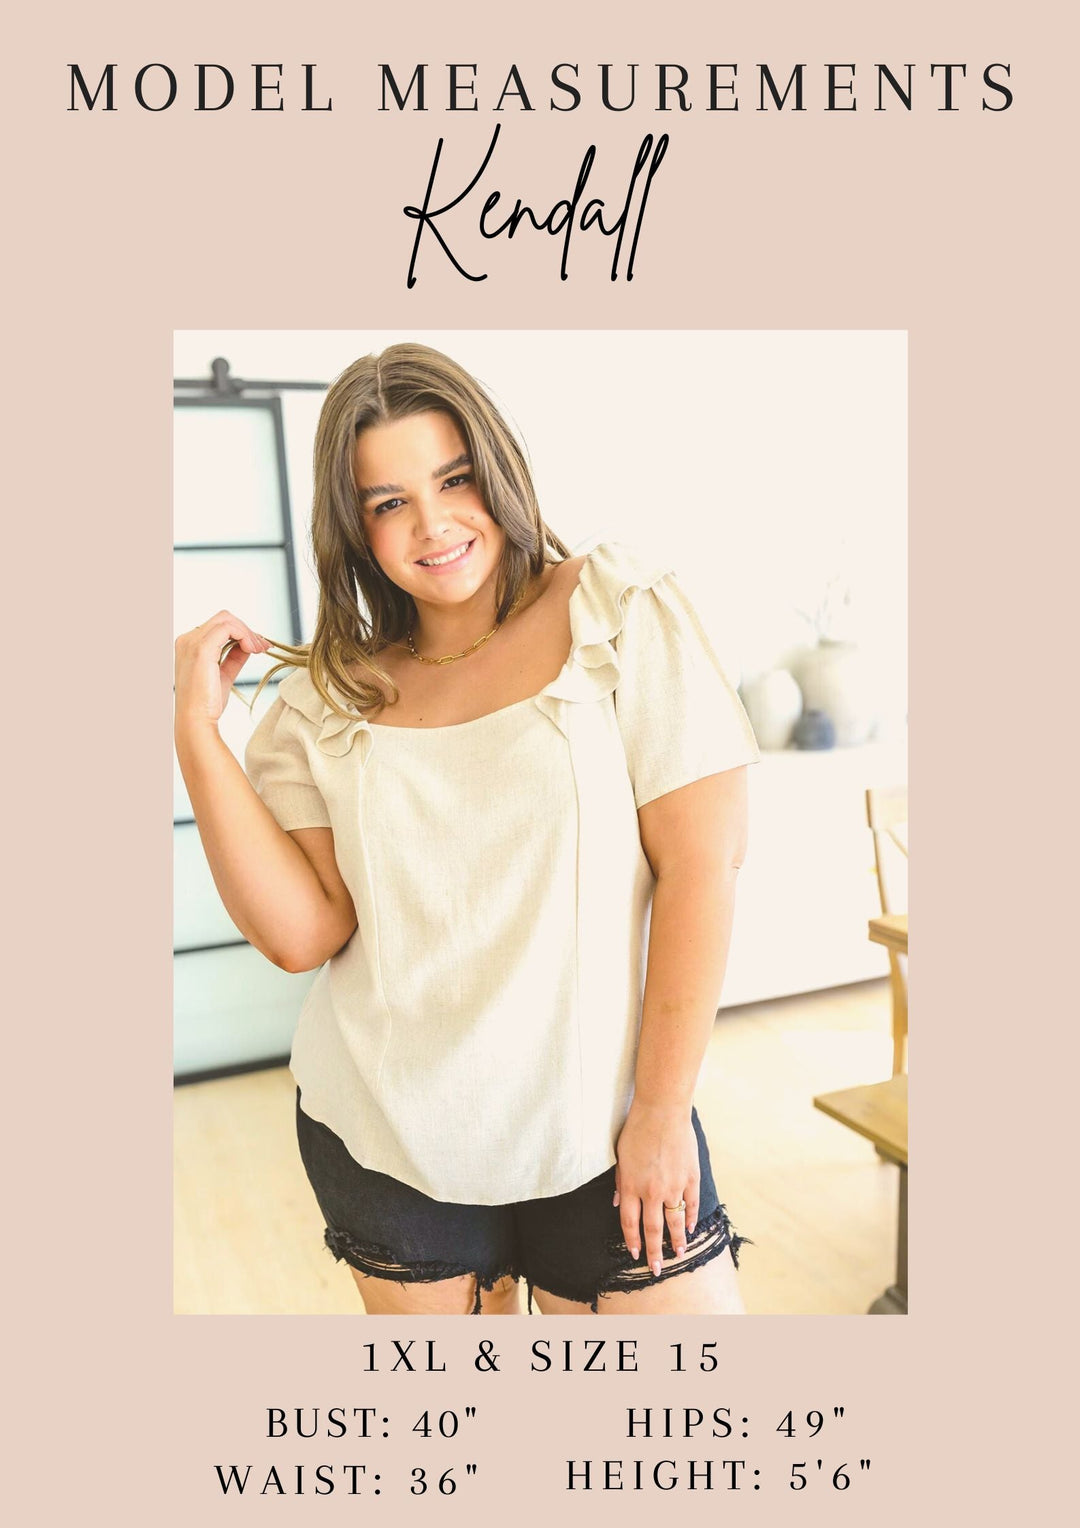 Impossible to Ignore Floral Blouse-Short Sleeve Tops-Krush Kandy, Women's Online Fashion Boutique Located in Phoenix, Arizona (Scottsdale Area)